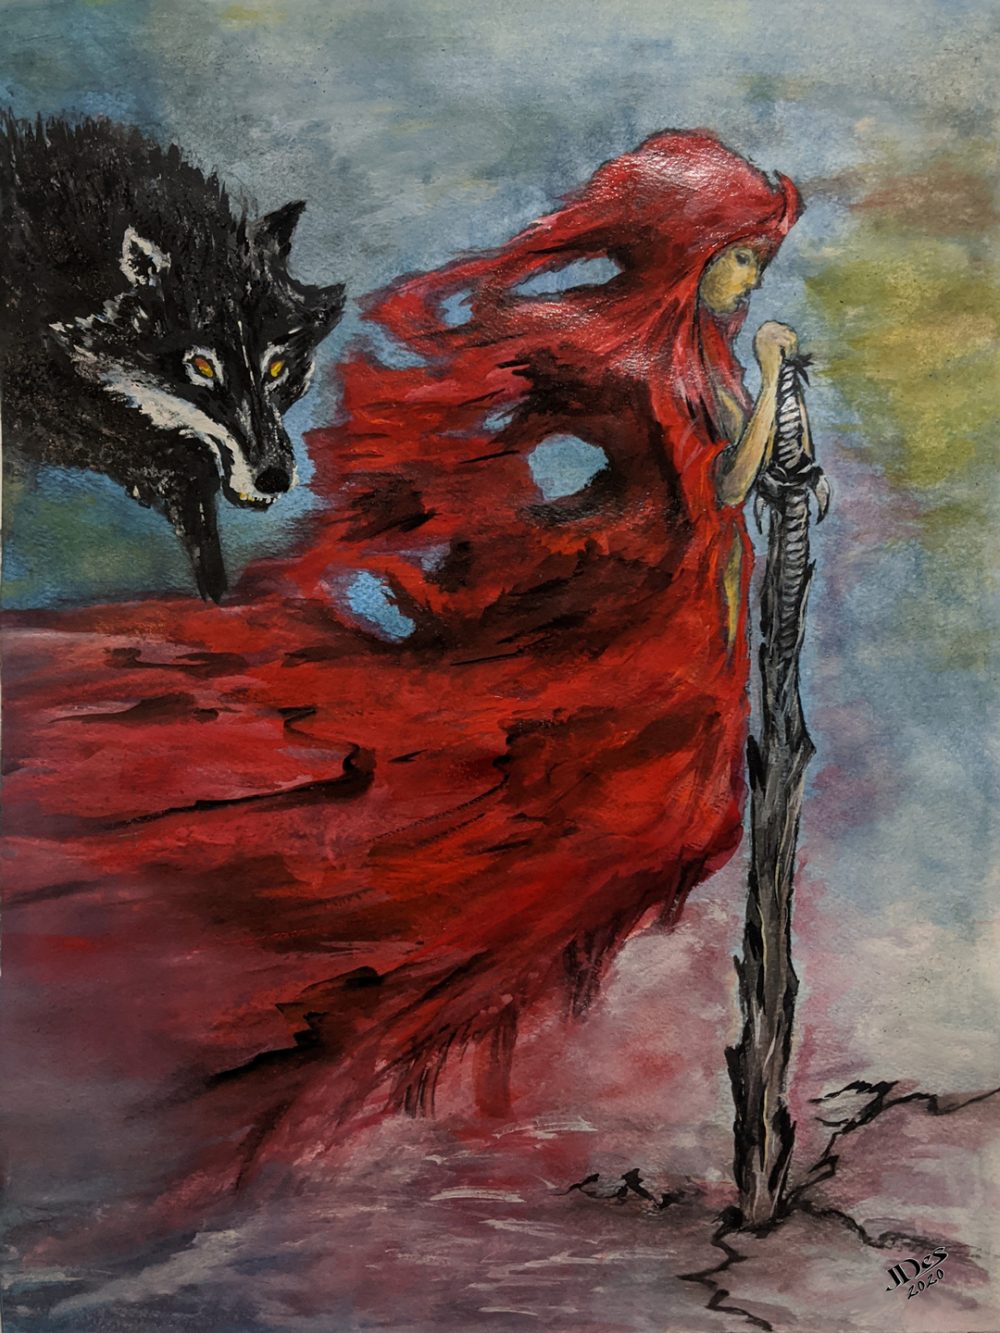 Drawing of a woman wearing a red cloak and a wolf approaching her from the left side.